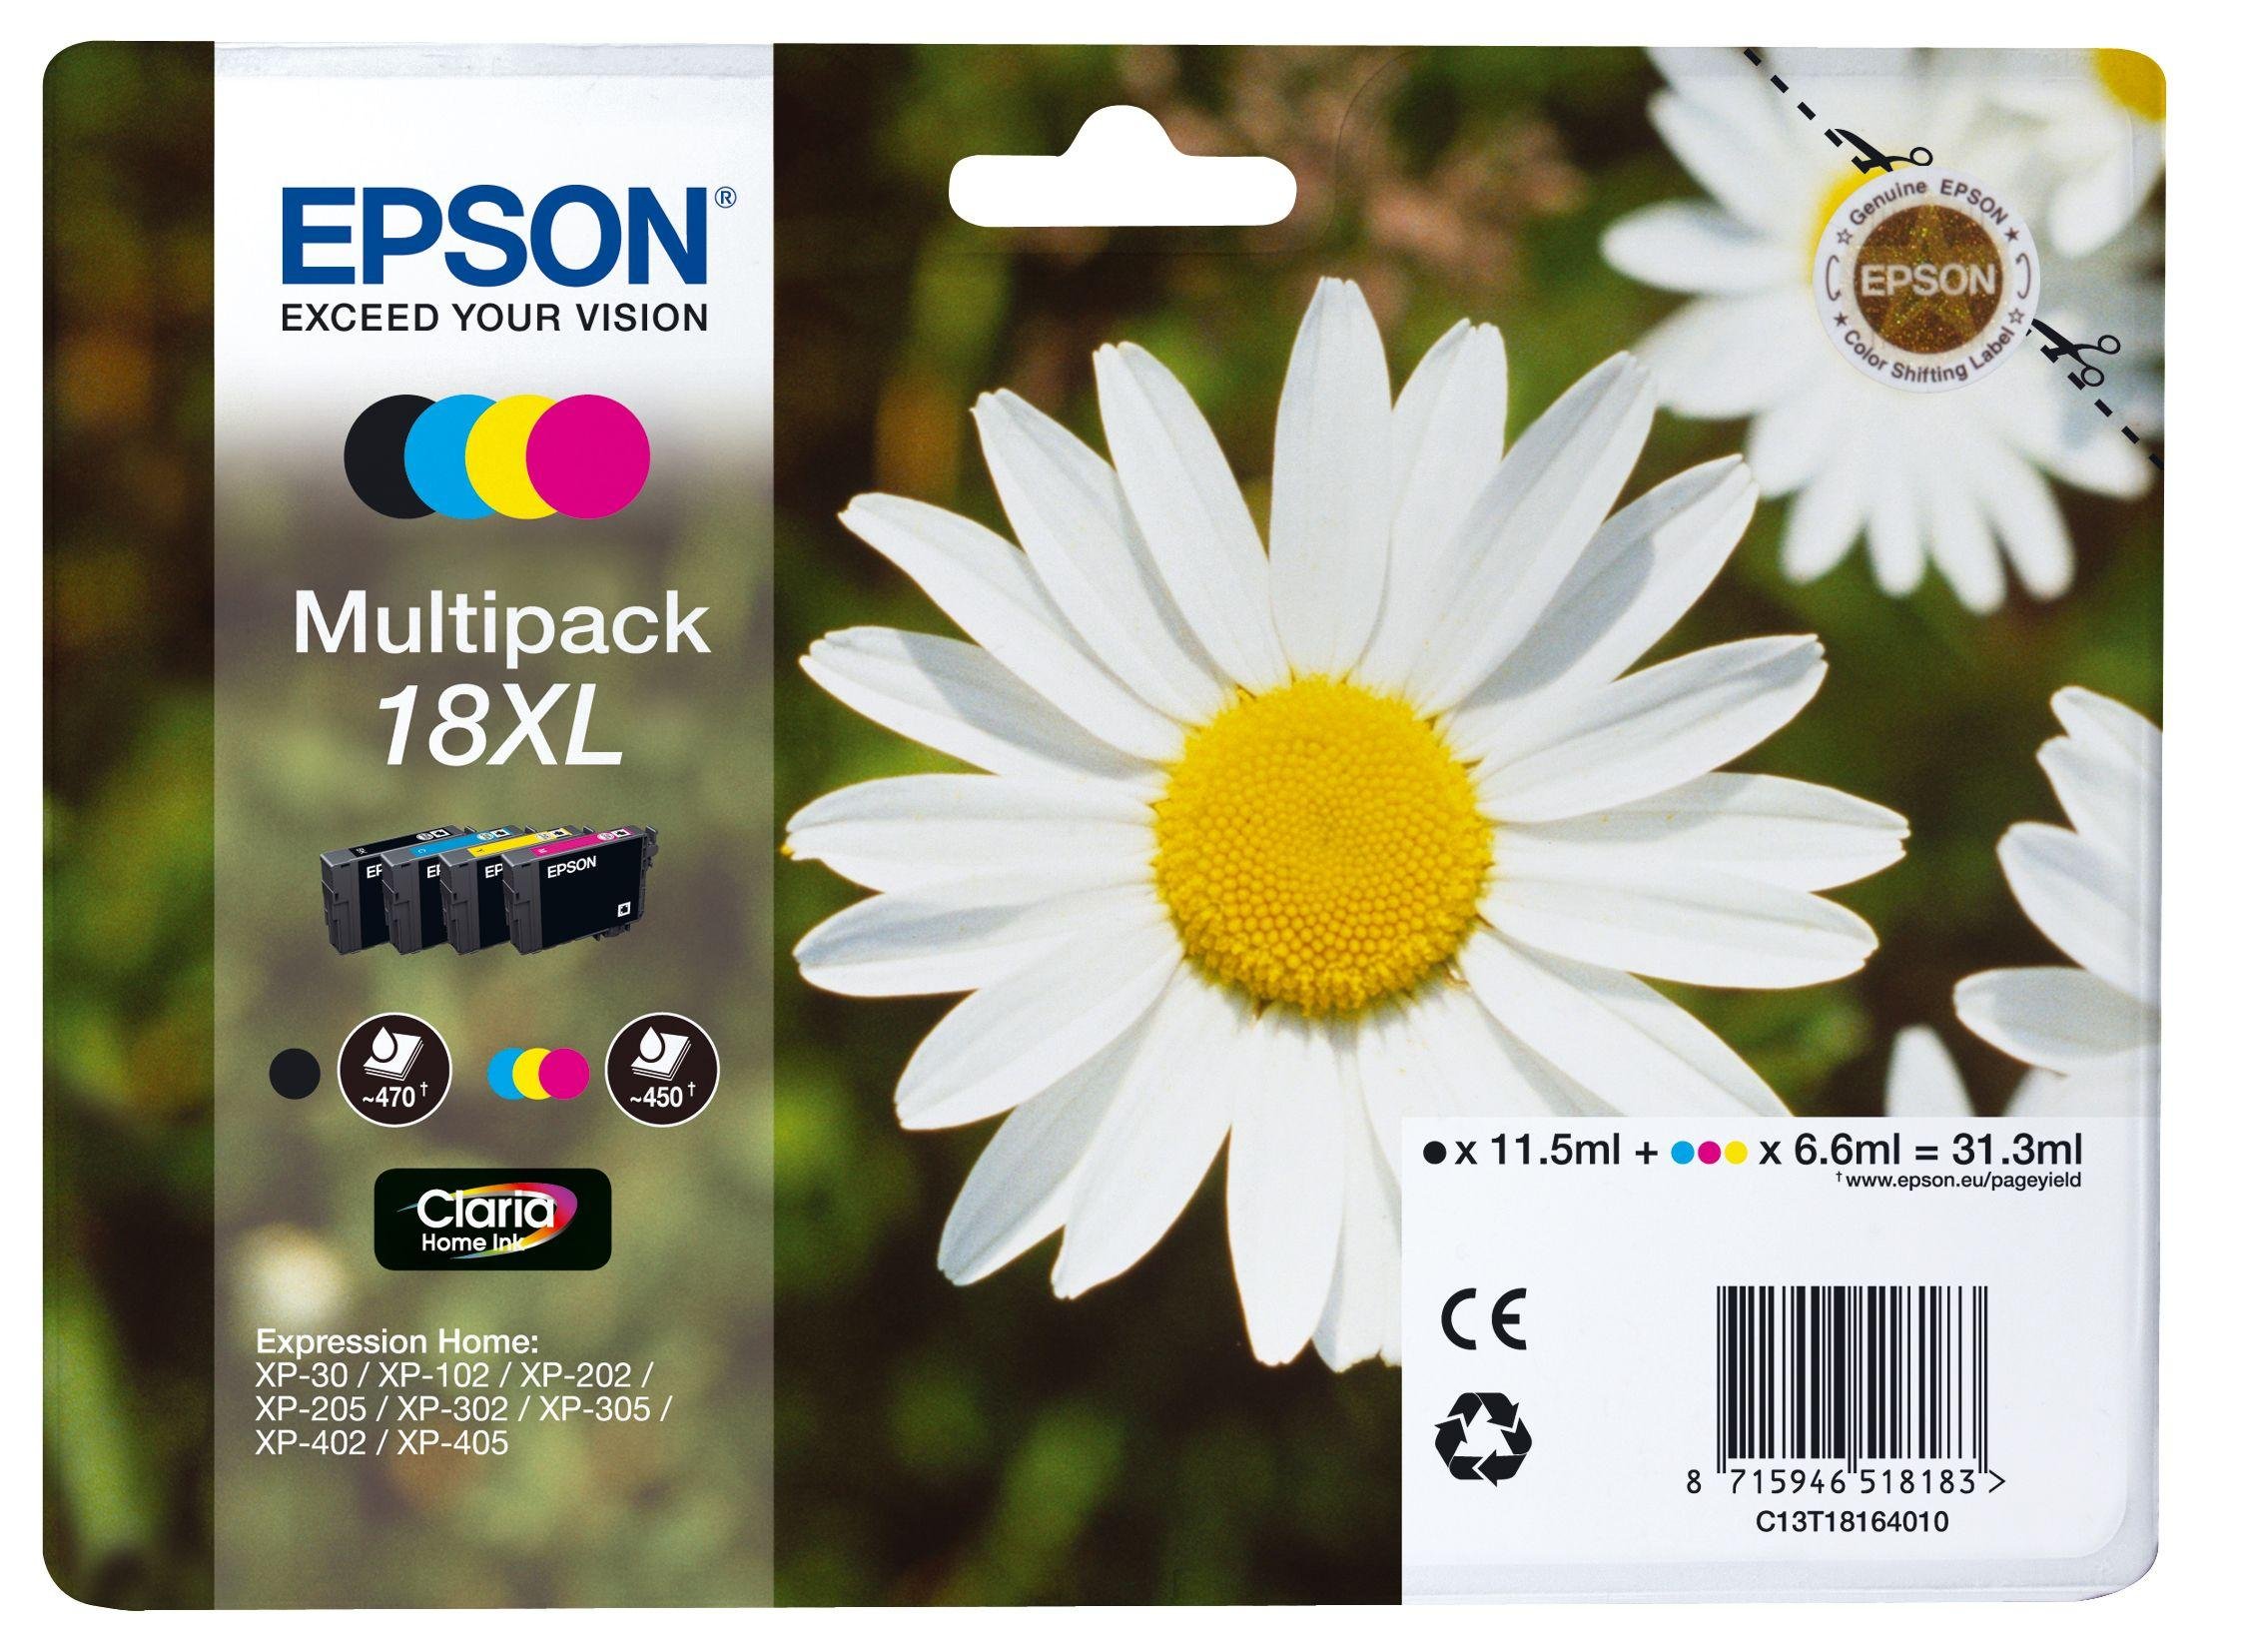 Epson Daisy 18XL Ink Cartridges Multipack review